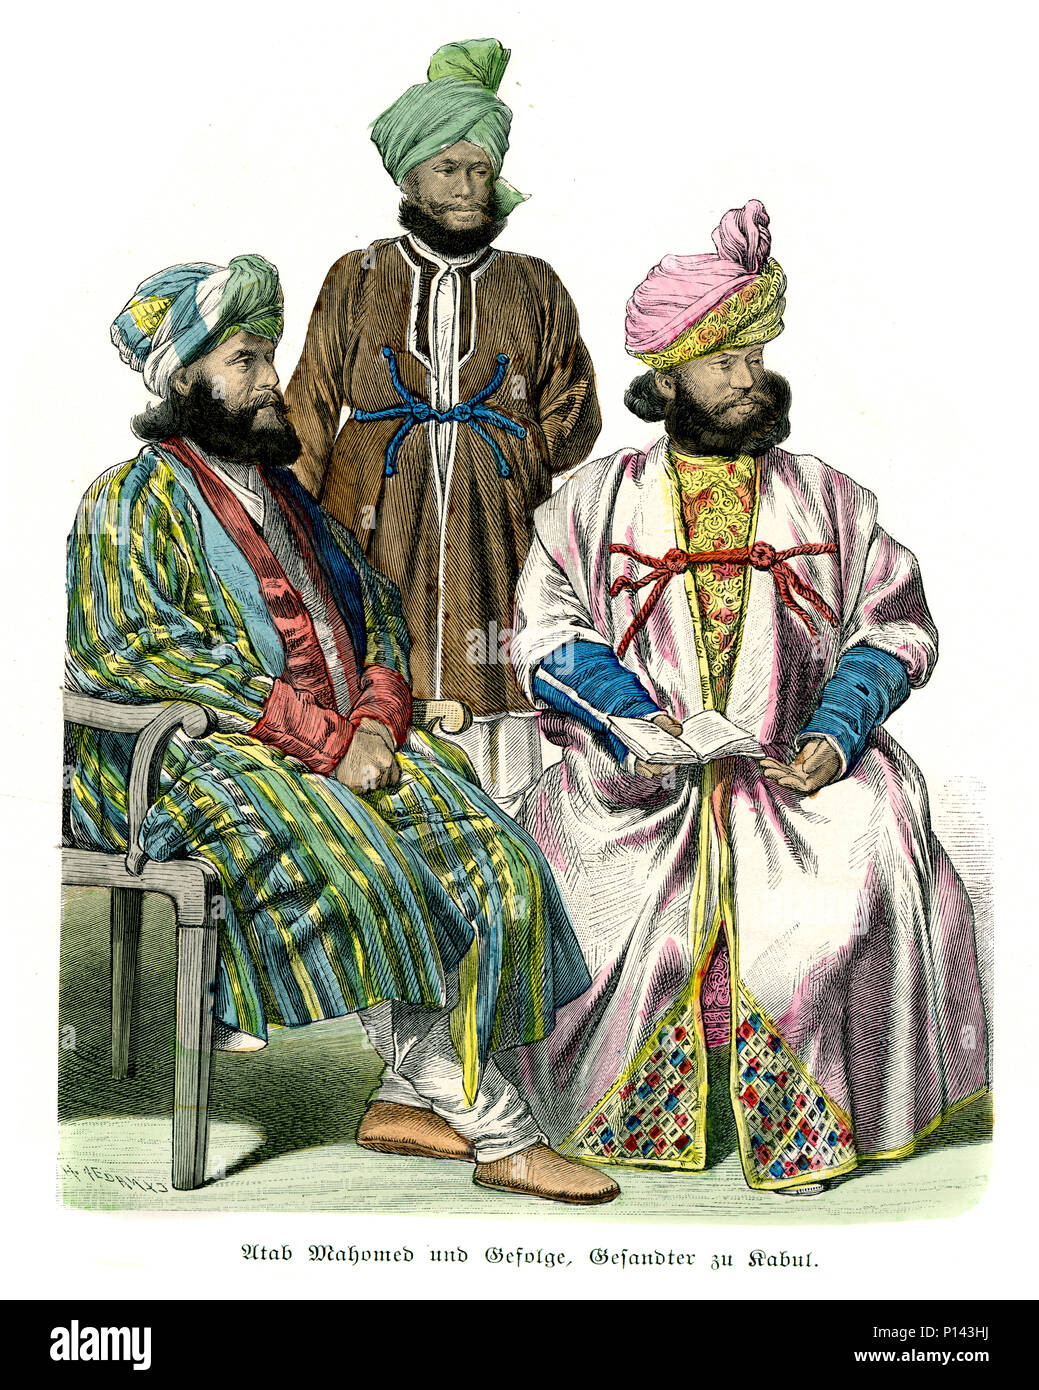 Vintage engraving of History of Fashion, Costumes of Afghanistan, 19th Century.  Atan Mohamed and Retinue and Ambassador of Kabul Stock Photo